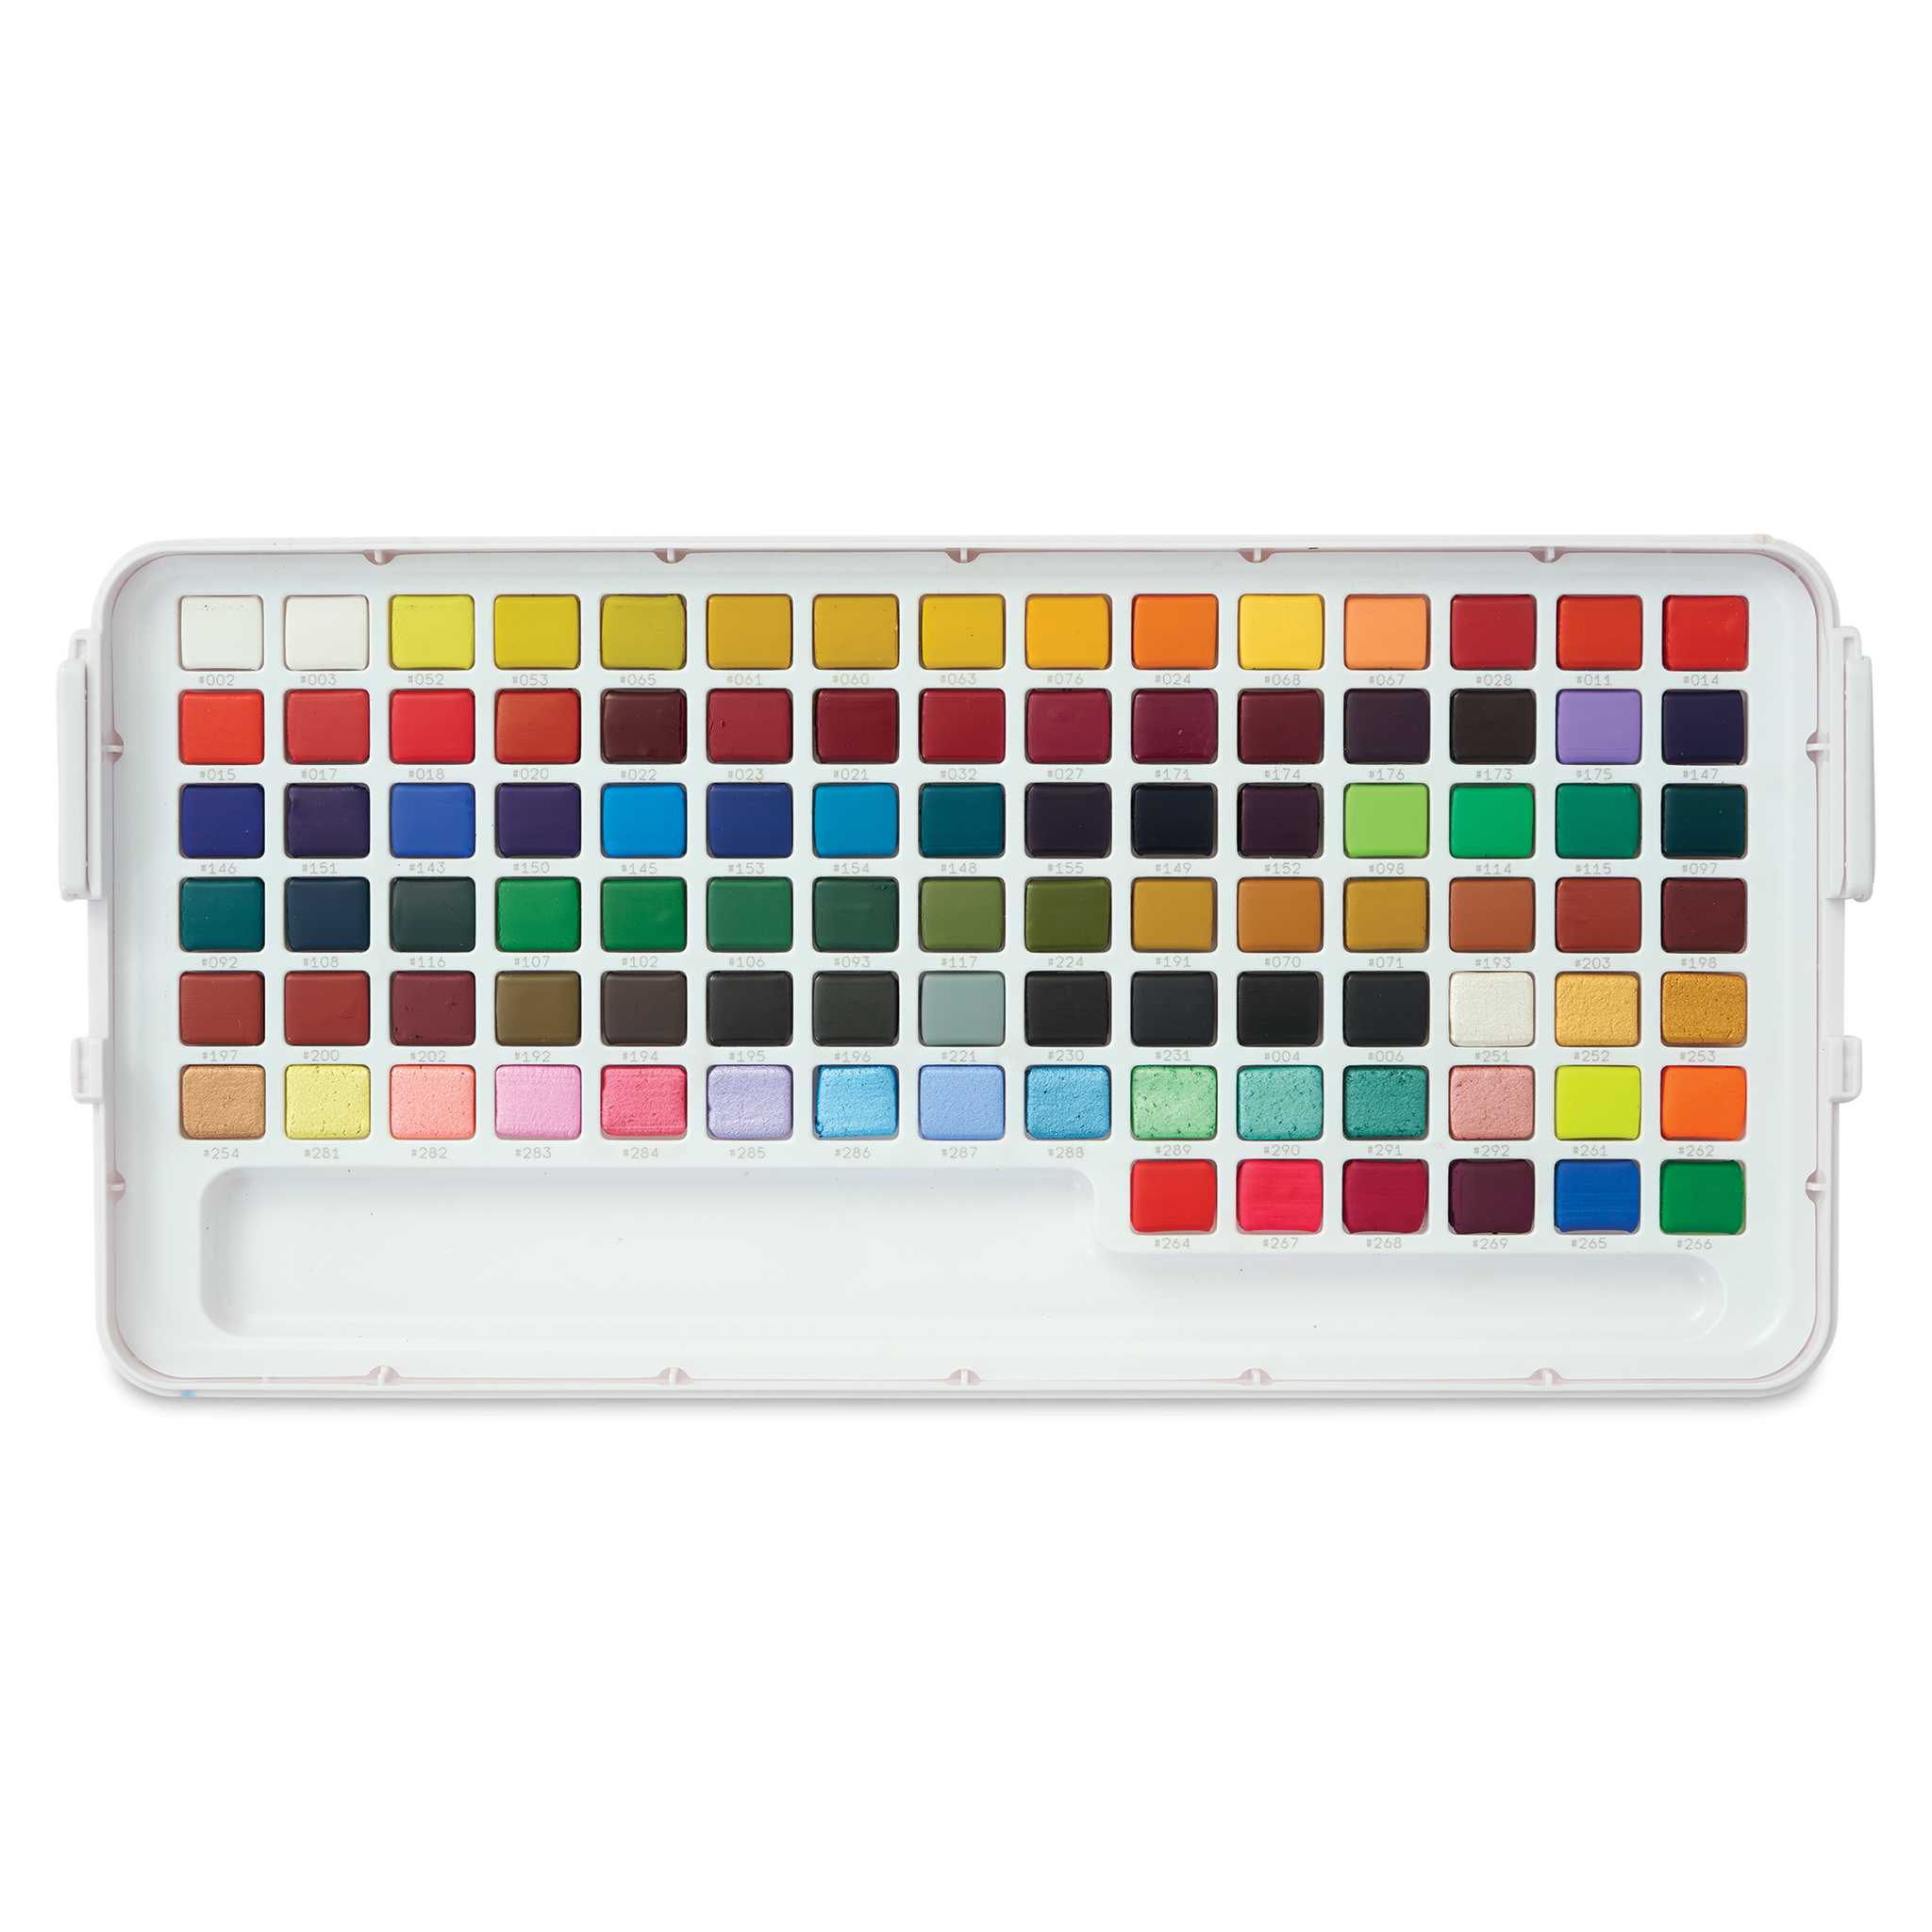 Koi Watercolor Pocket Field Sketch Travel Kit- 12 Half Pans and Waterb —  Two Hands Paperie